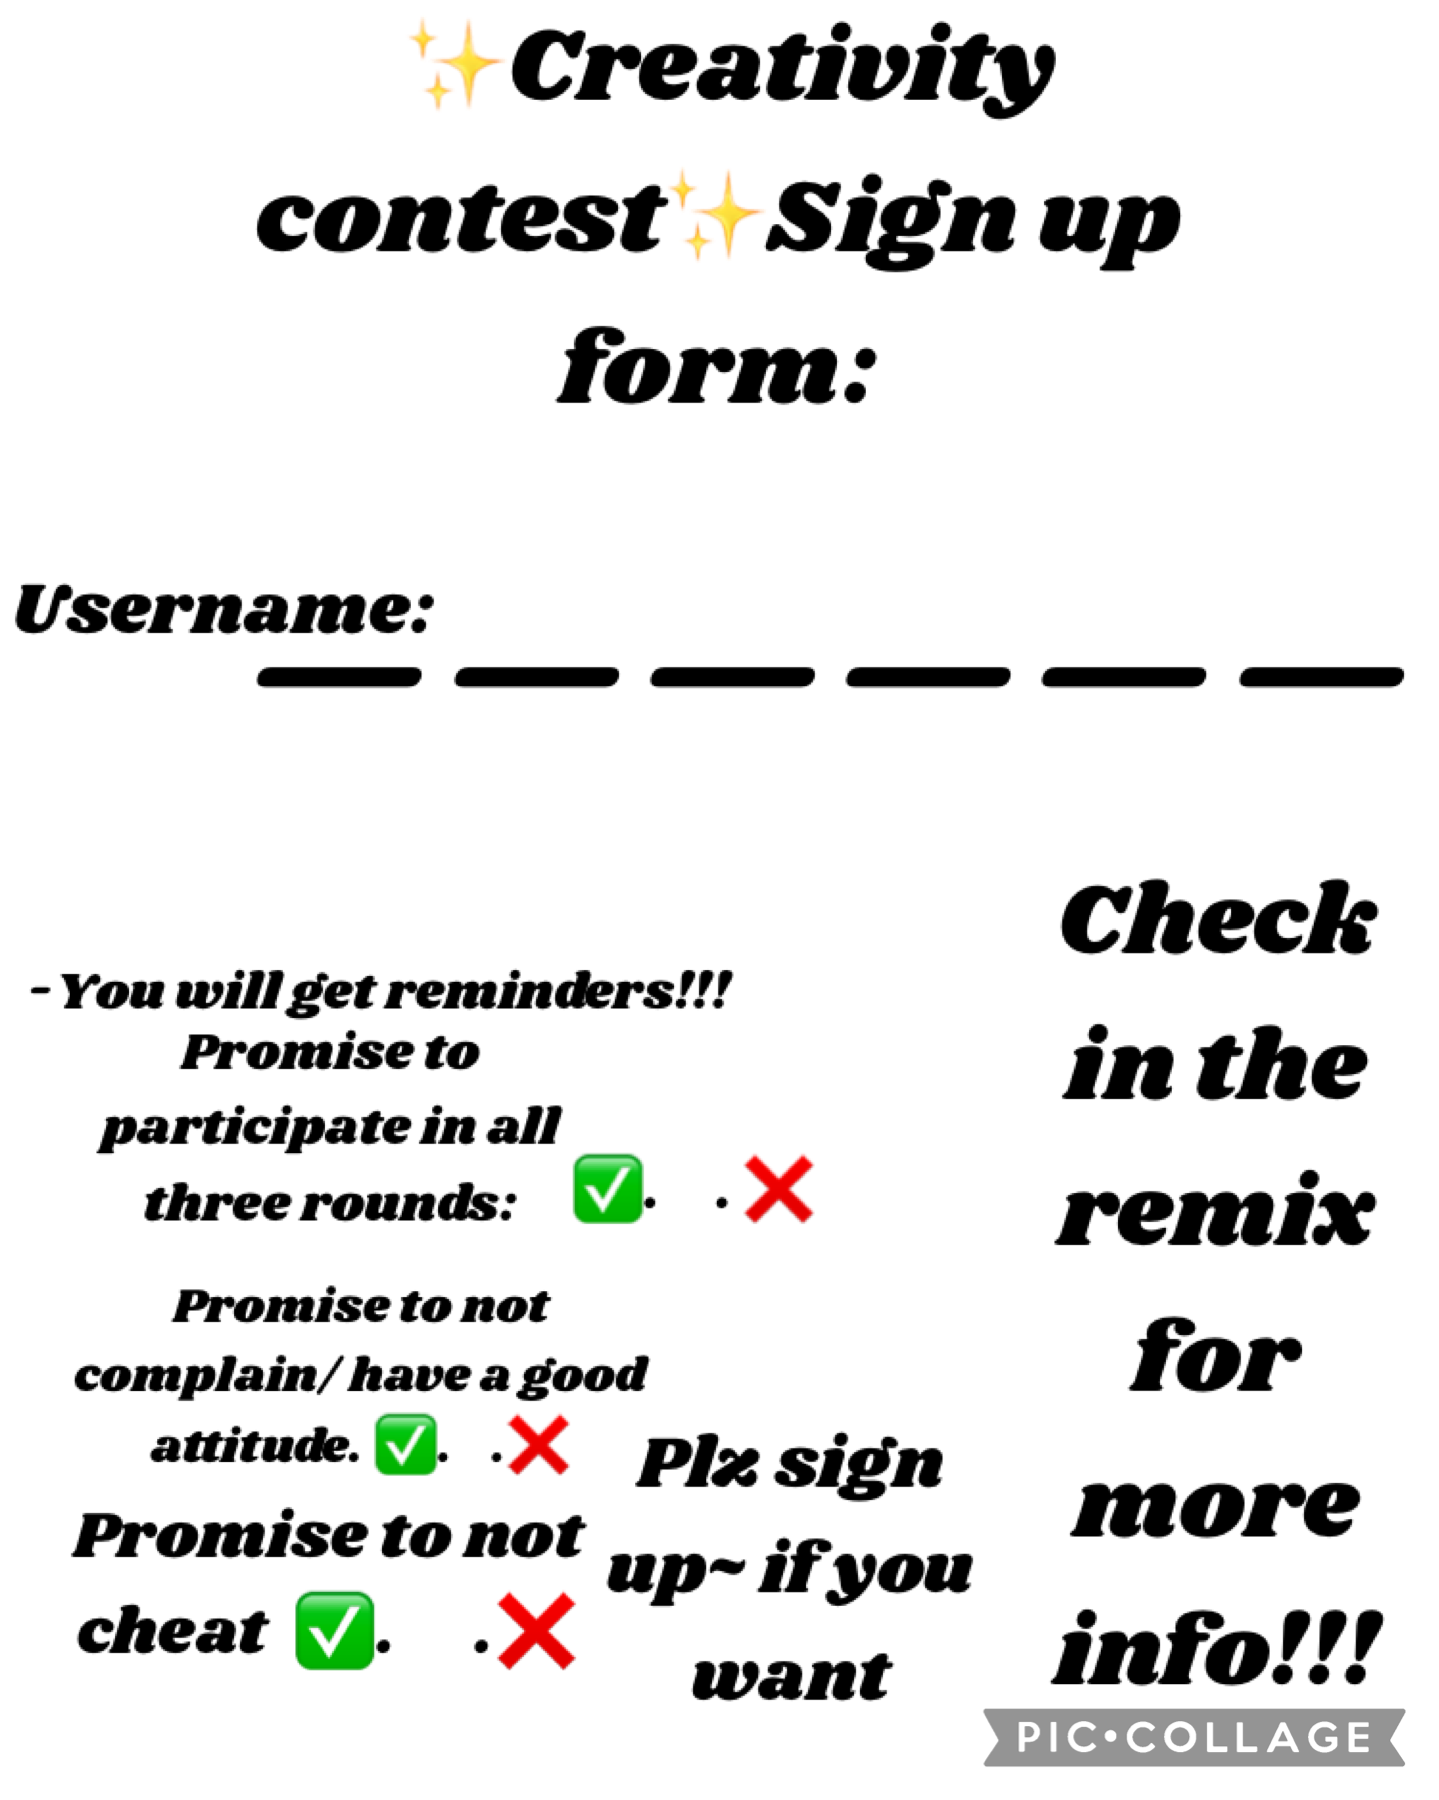 PLZ SIGN UP!!!~ if you want 🙃